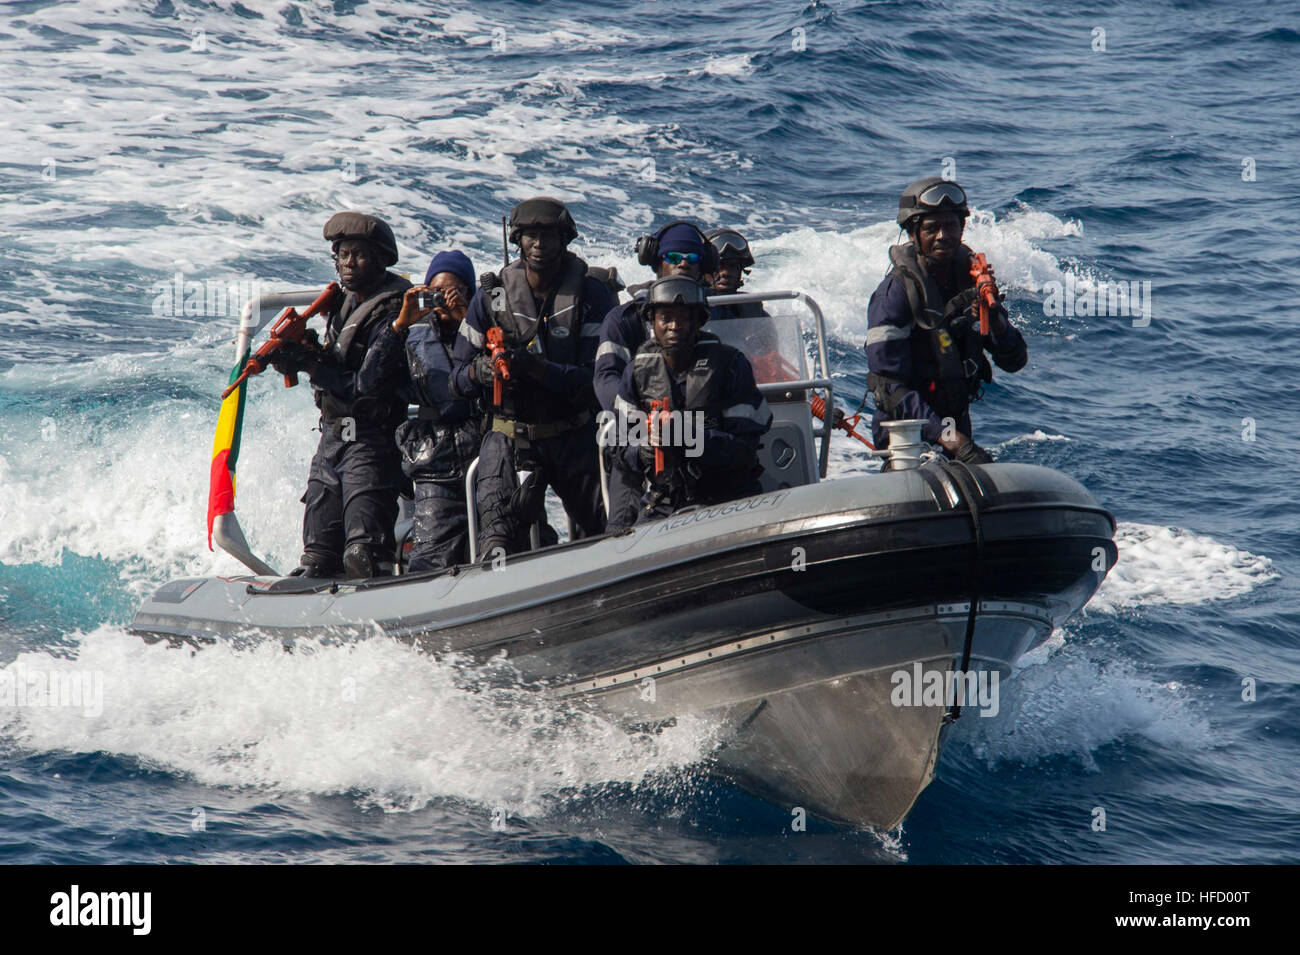 150425-N-TC720-029 ATLANTIC OCEAN (April 25, 2015) Members of the Senegalese military approach the Portuguese navy frigate Bartolomeu Dias (F-333) for a visit, board, search and seizure drill during Exercise Saharan Express 2015, April 25. Saharan Express is a U.S. Africa Command-sponsored multinational maritime exercise designed to increase maritime safety and security in the waters of West Africa. (U.S. Navy photo by Mass Communication Specialist 3rd Class Mat Murch/Released) Saharan Express 2015 150425-N-TC720-029 Stock Photo